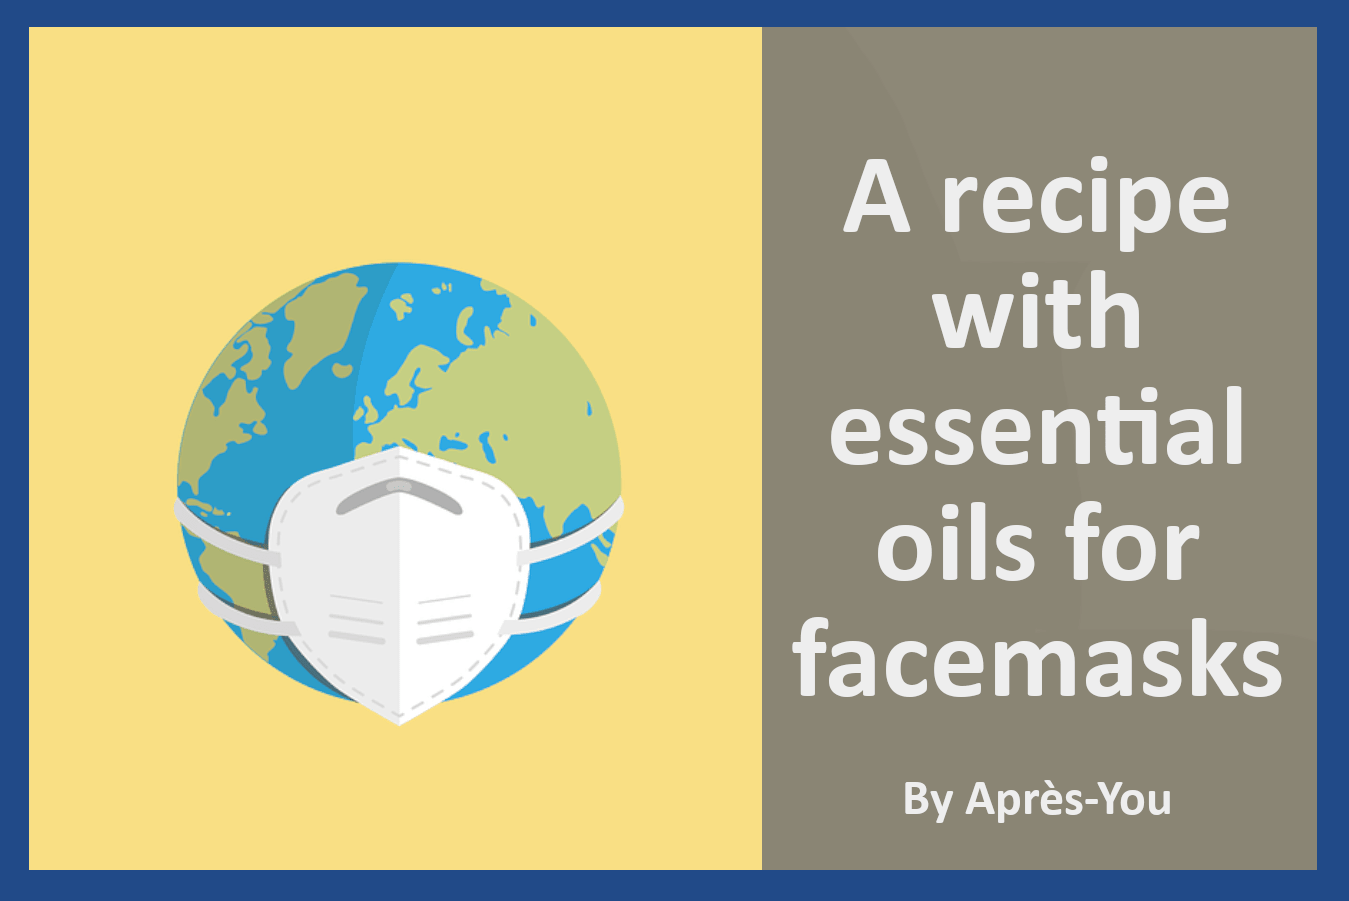 A recipe with essential oils for facemasks